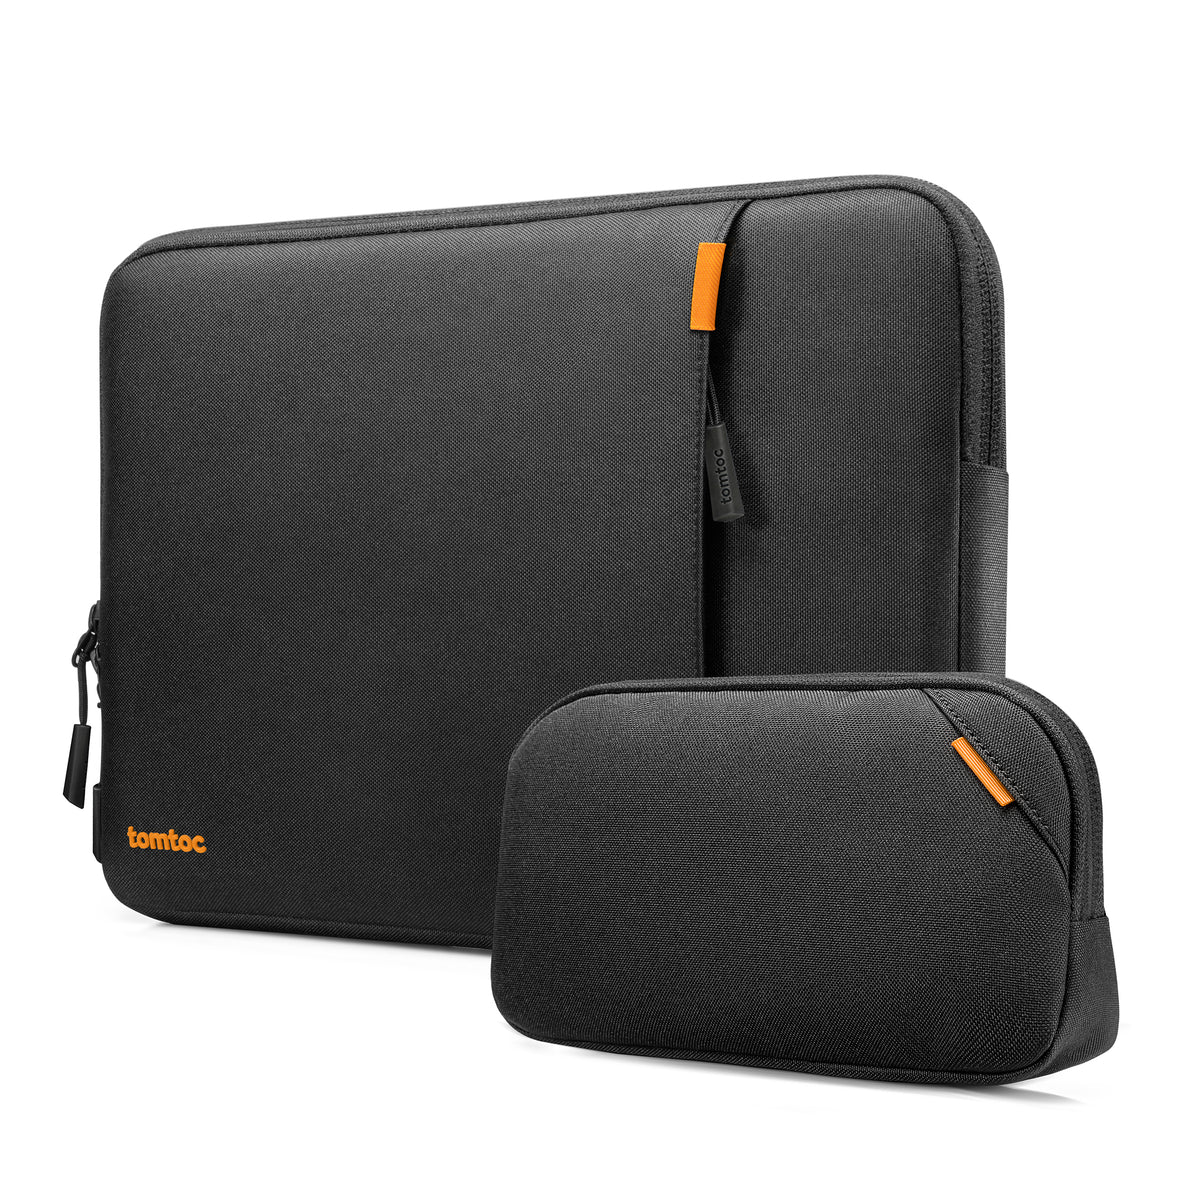 tomtoc 14 Inch Versatile 360 Protective Laptop Sleeve with Pouch - Black